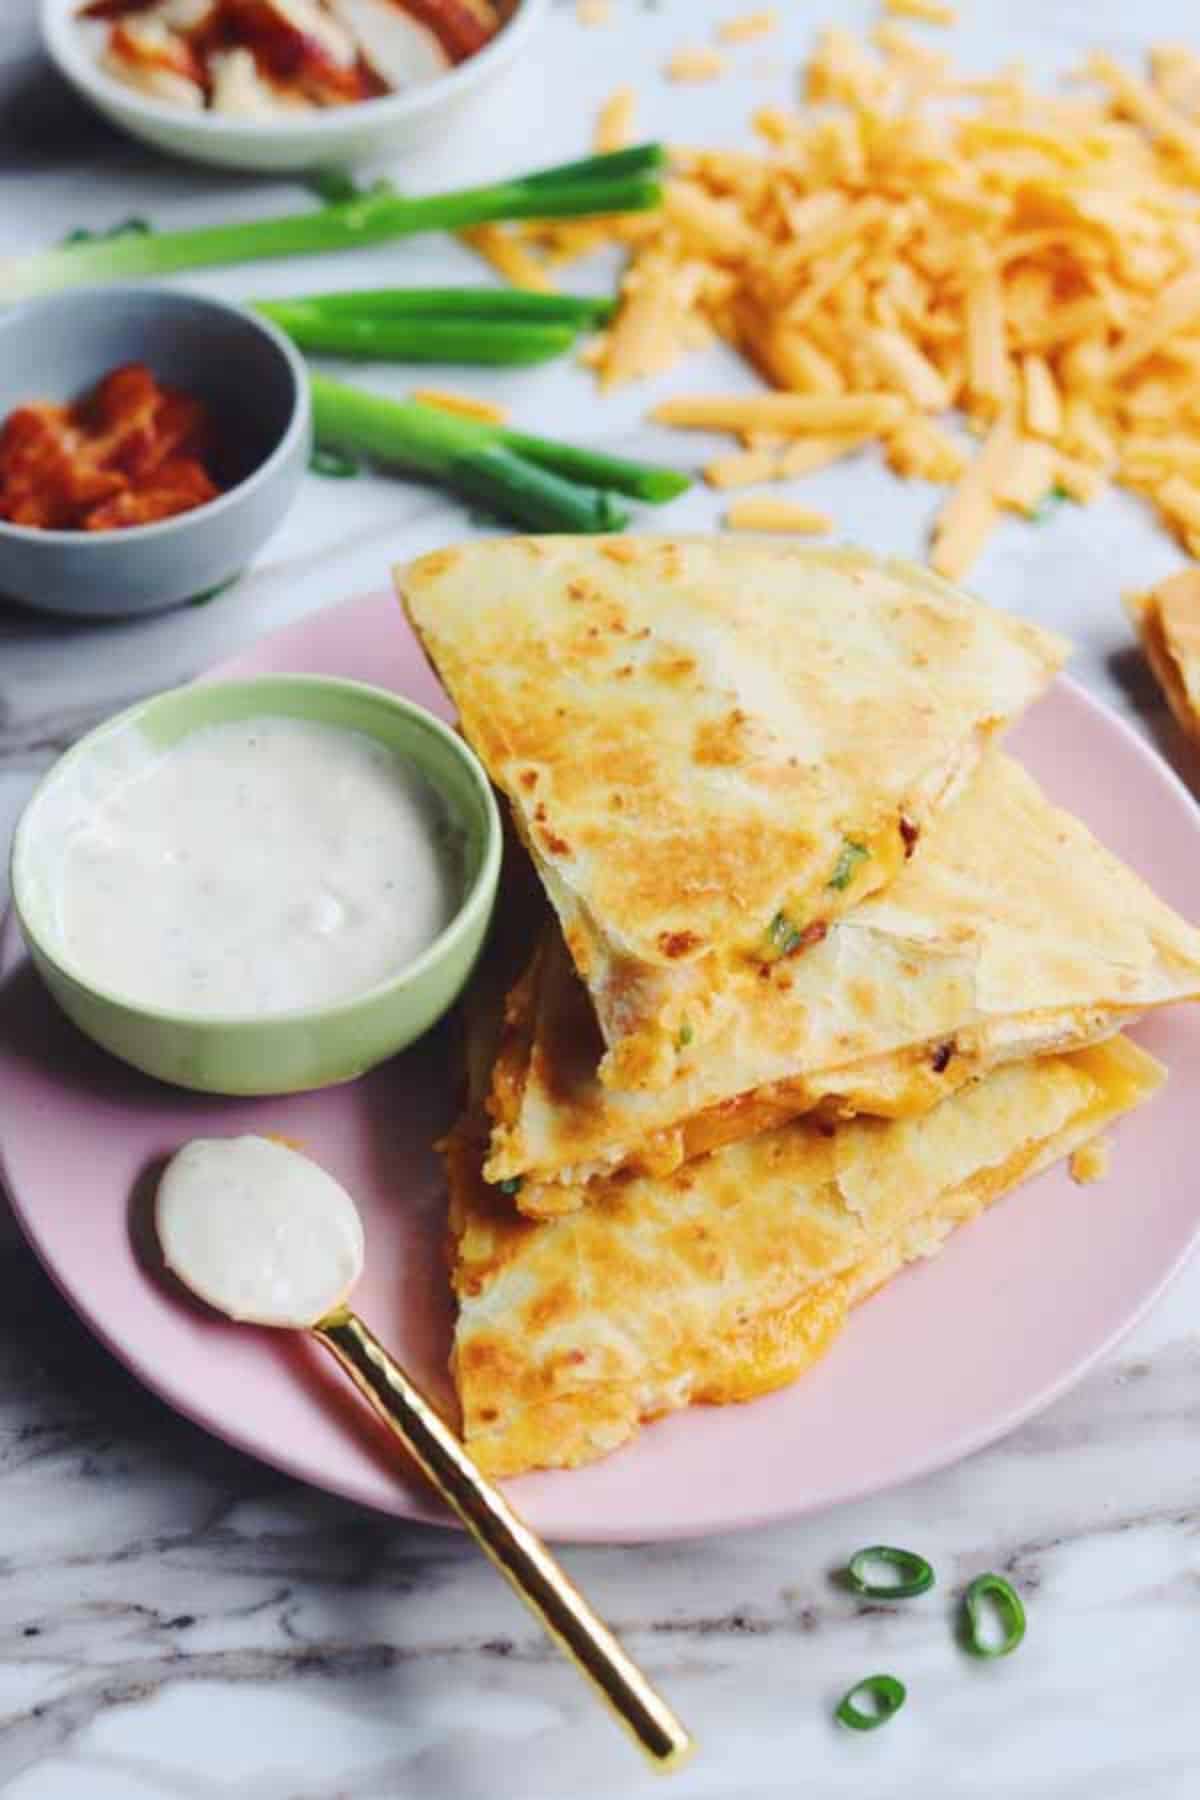 Scrumptious Cheesy Chicken Bacon Ranch Quesadillas on a pink plate.